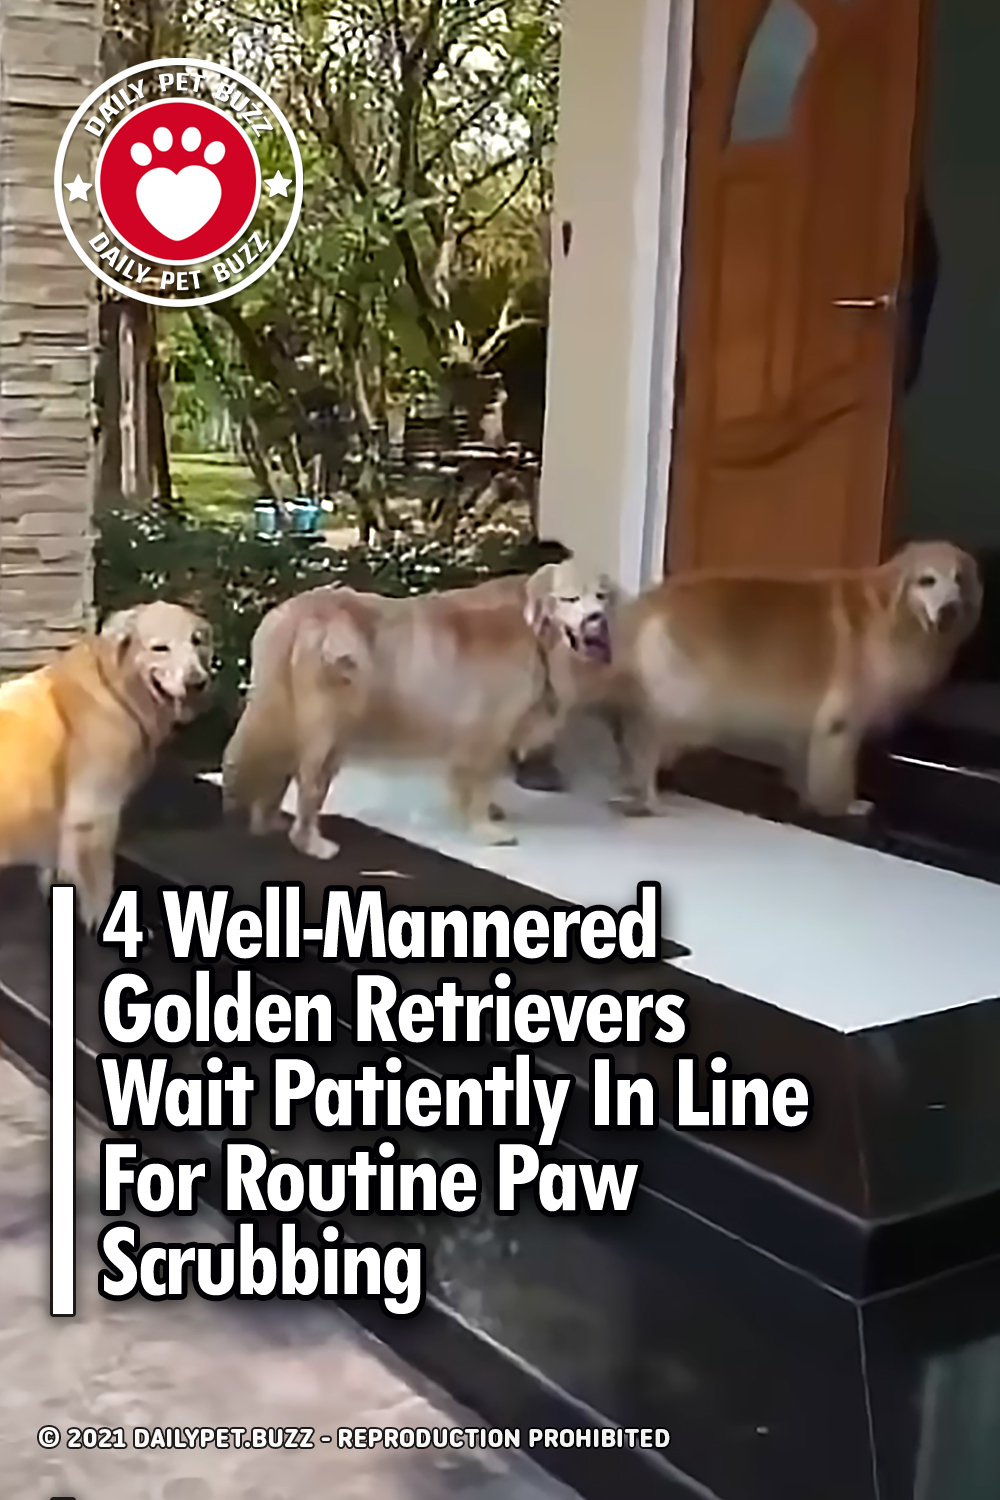 4 Well-Mannered Golden Retrievers Wait Patiently In Line For Routine Paw Scrubbing